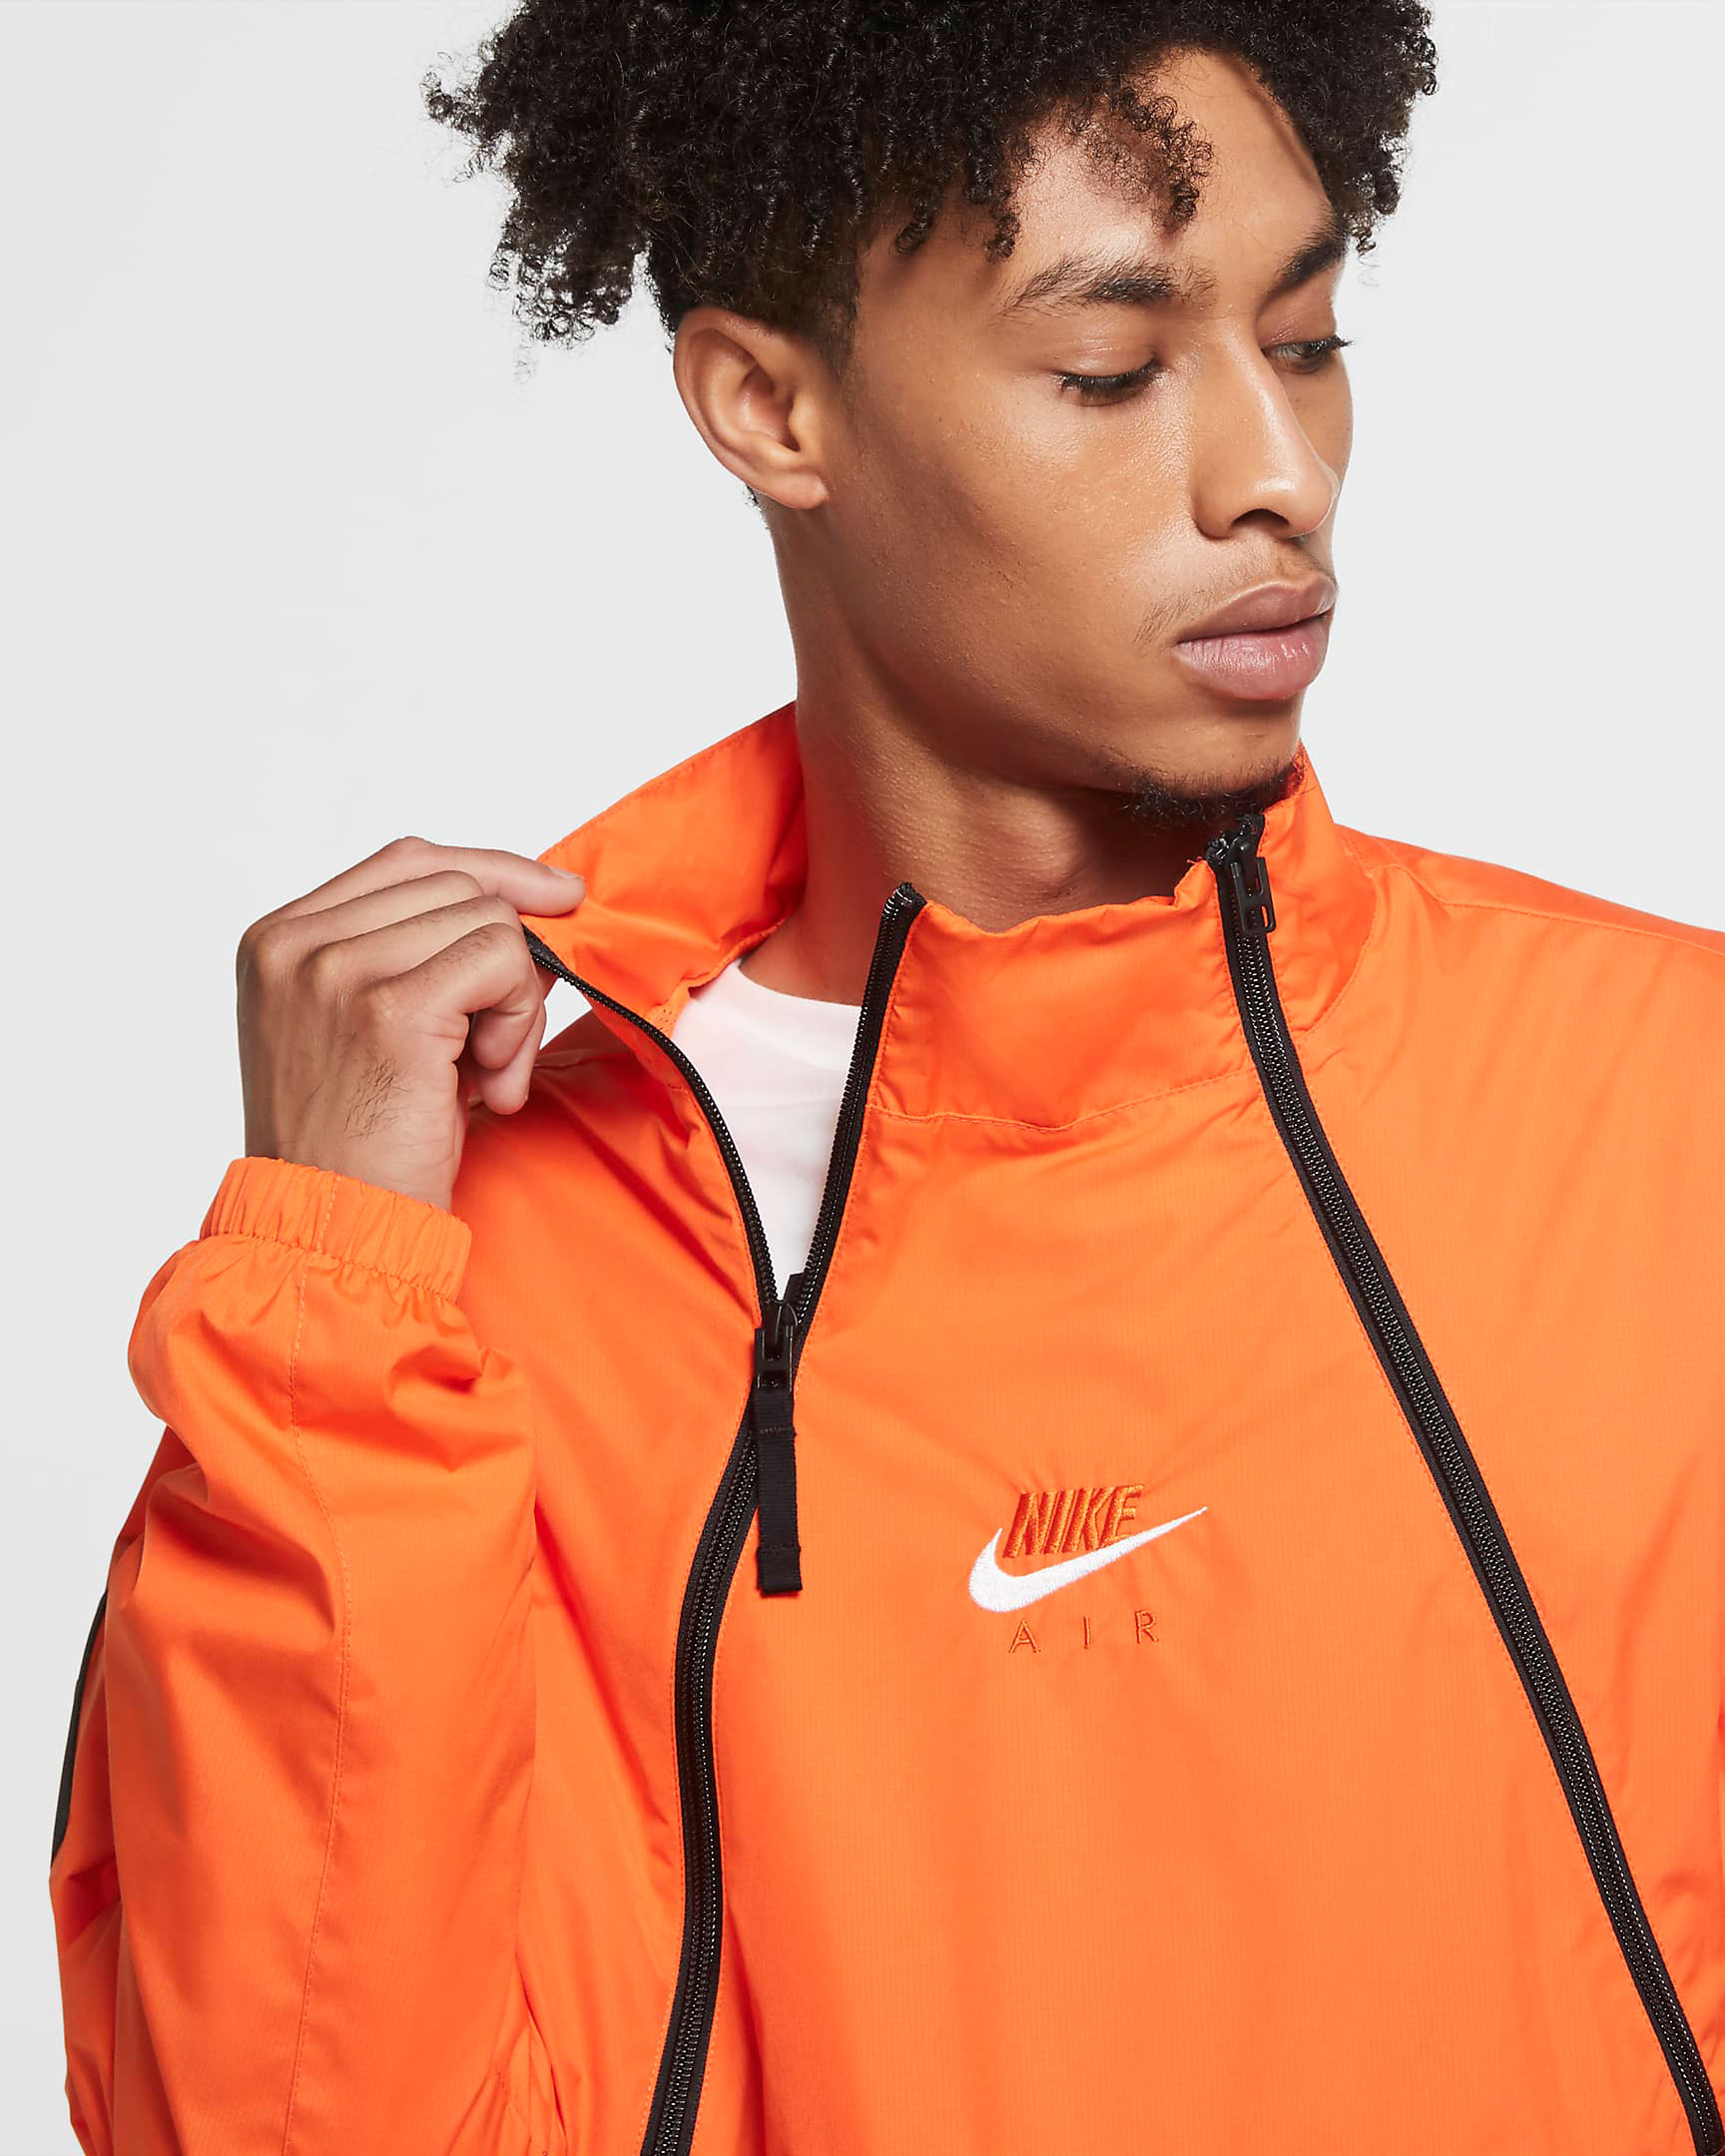 Nike Air Reflective Jackets for Fall 2020 | SneakerFits.com